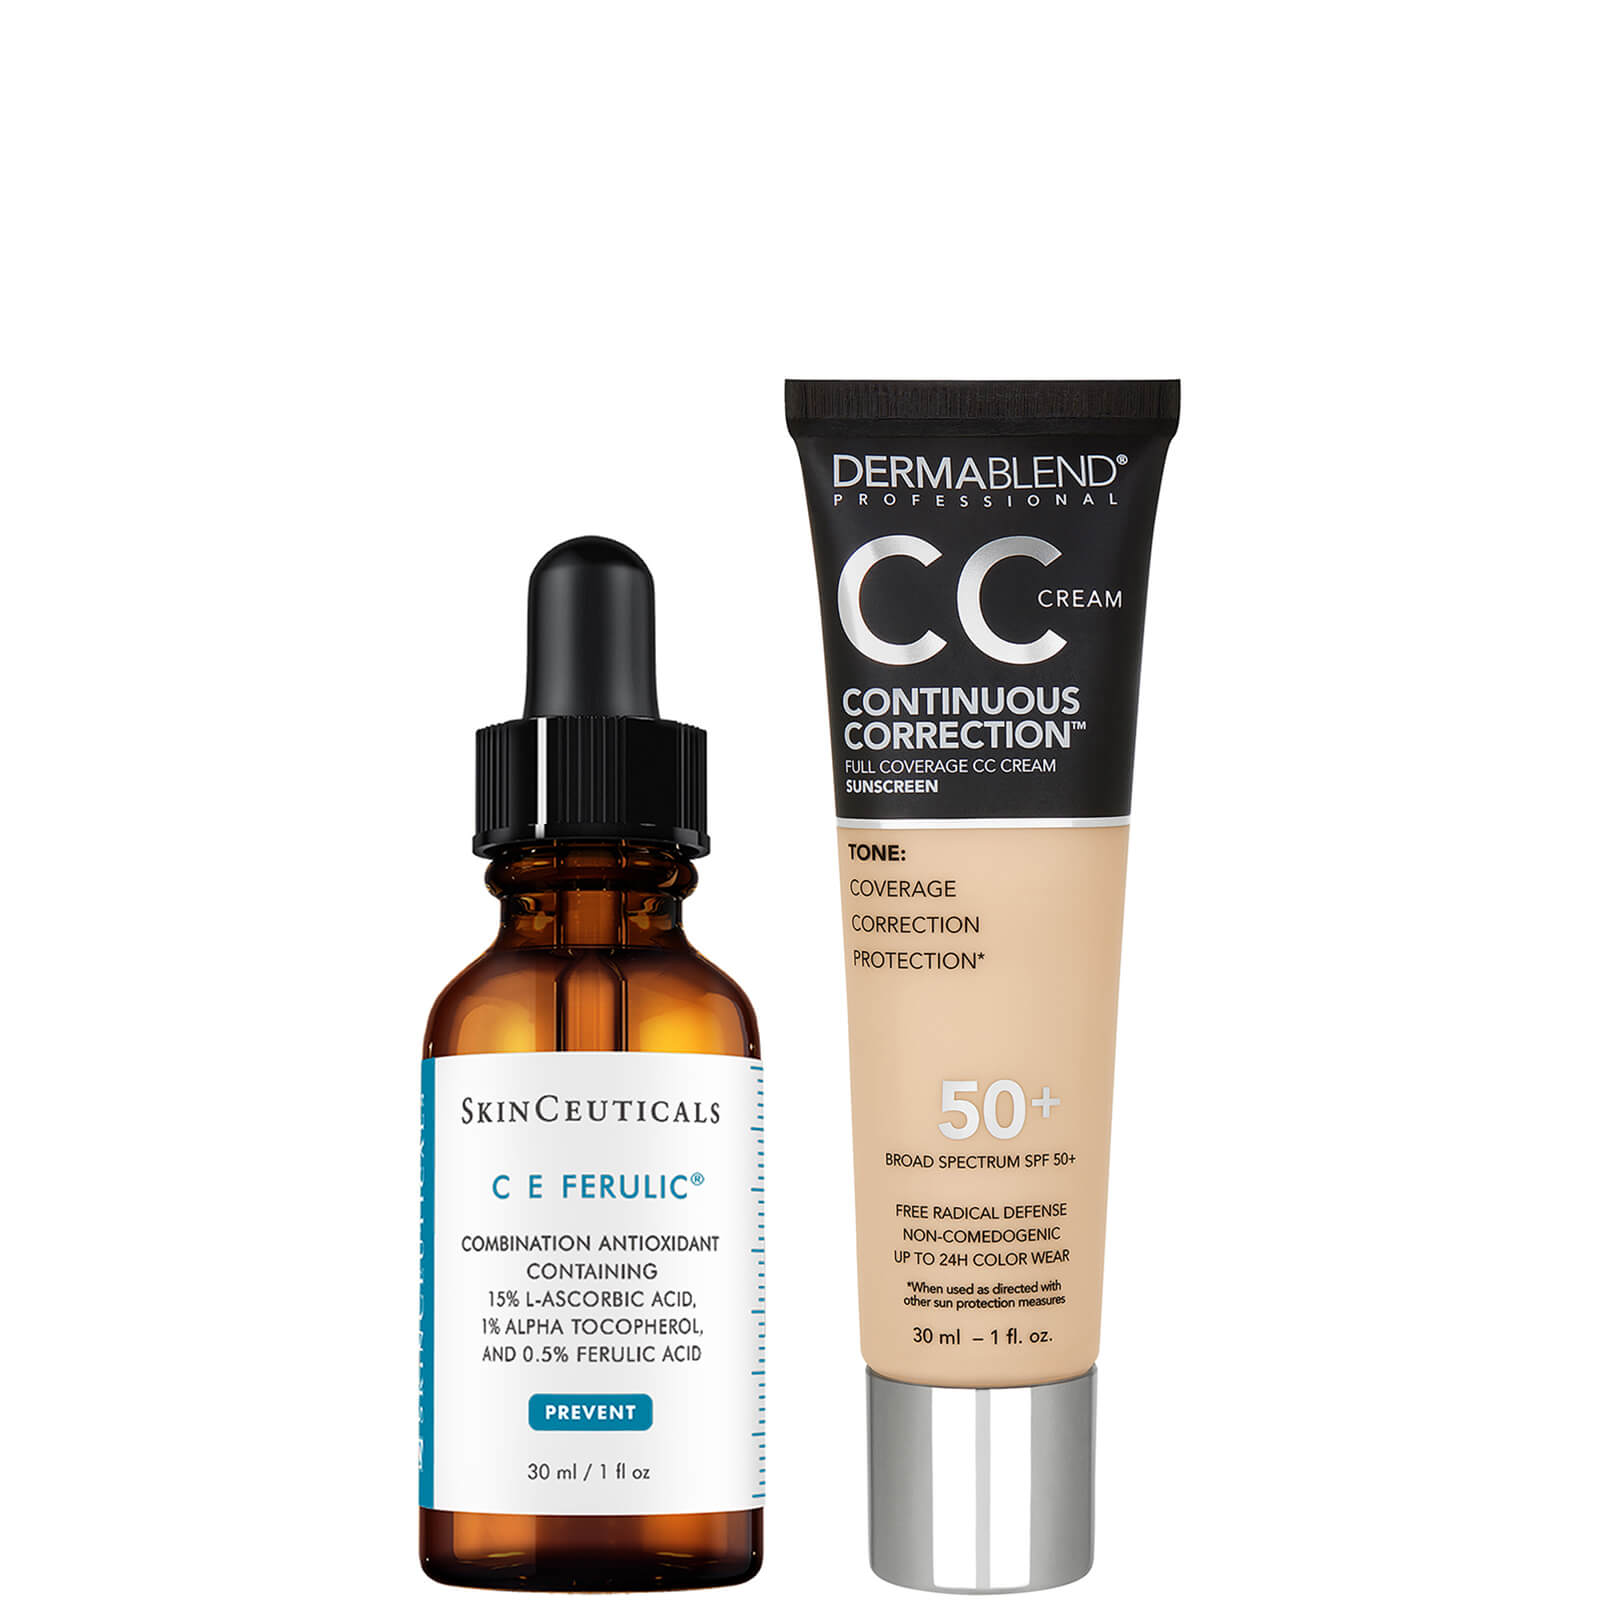 SkinCeuticals and Dermablend Anti-Aging Brightening Duo with Vitamin C and Niacinamide (Various Shades) ($223 Value) - 25N Light 1